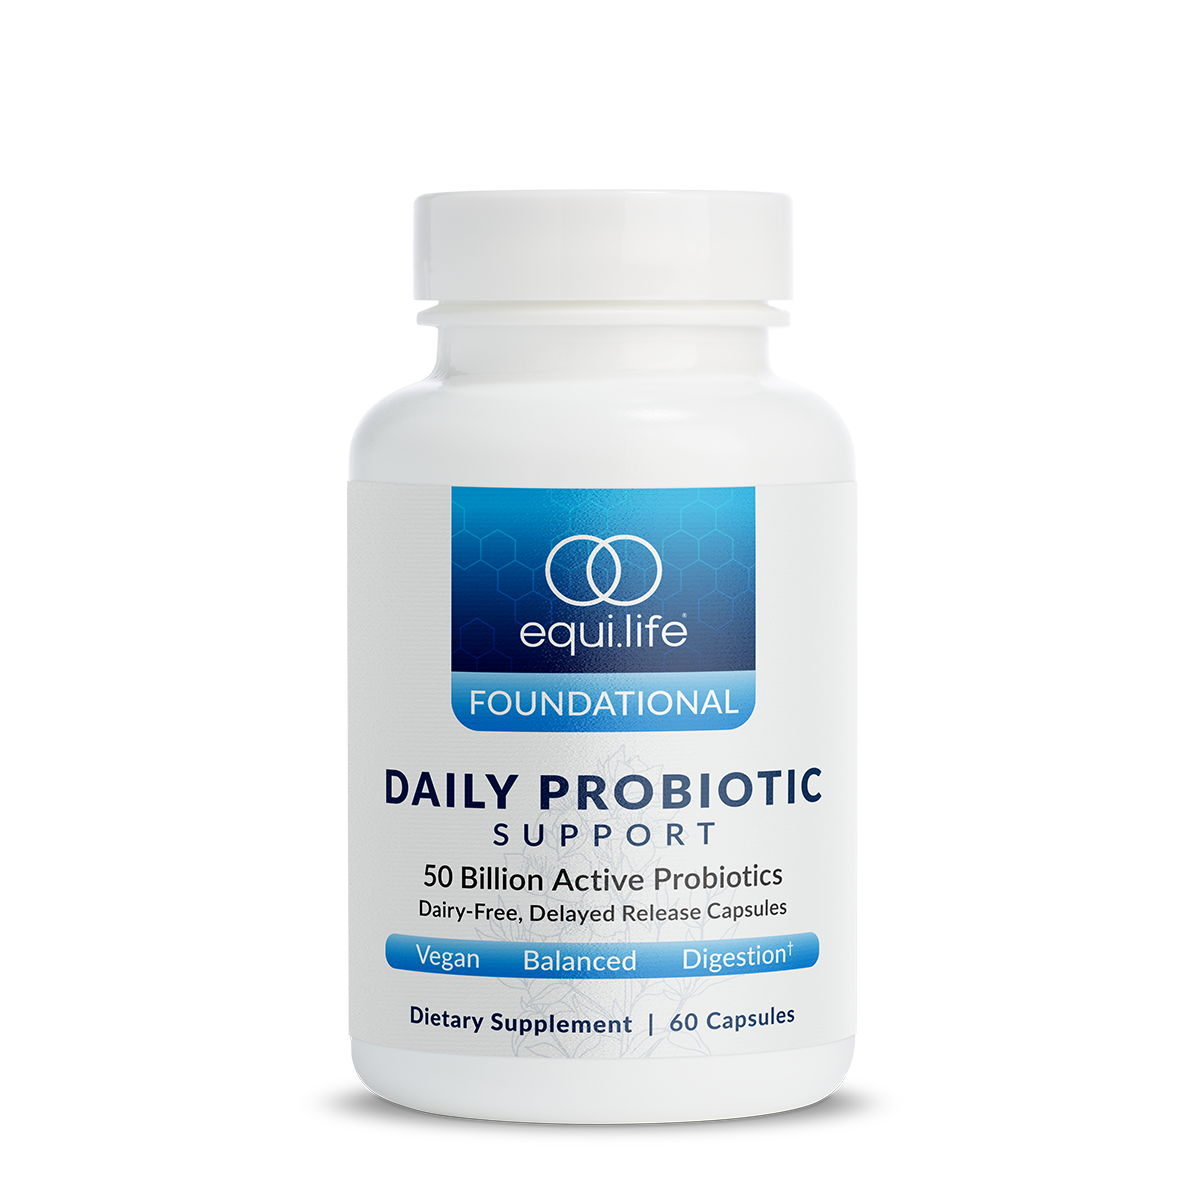 Daily Probiotic Support